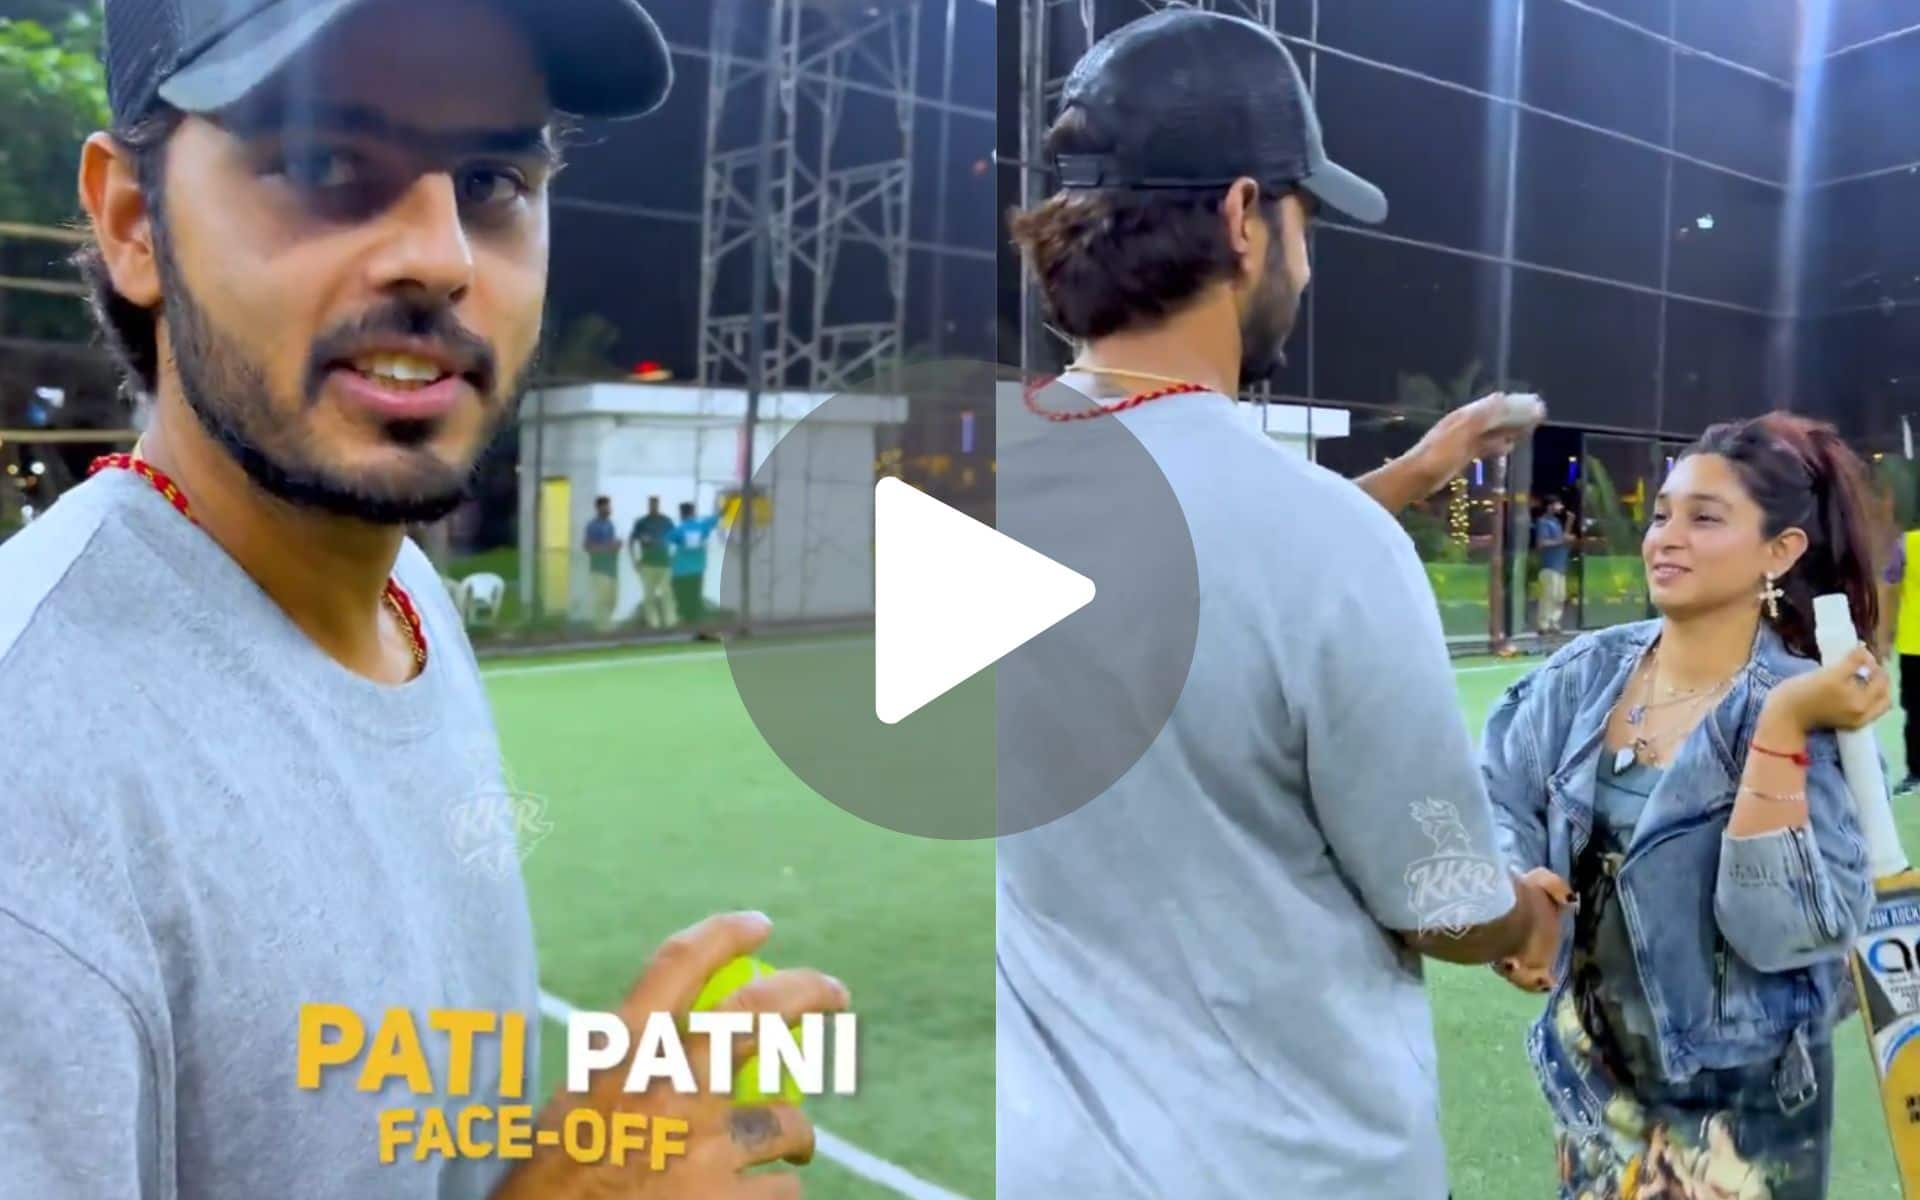 [Watch] Saachi Marwah Hits Nitish Rana For A Pull In Pati-Patni Face-Off With KKR Mates